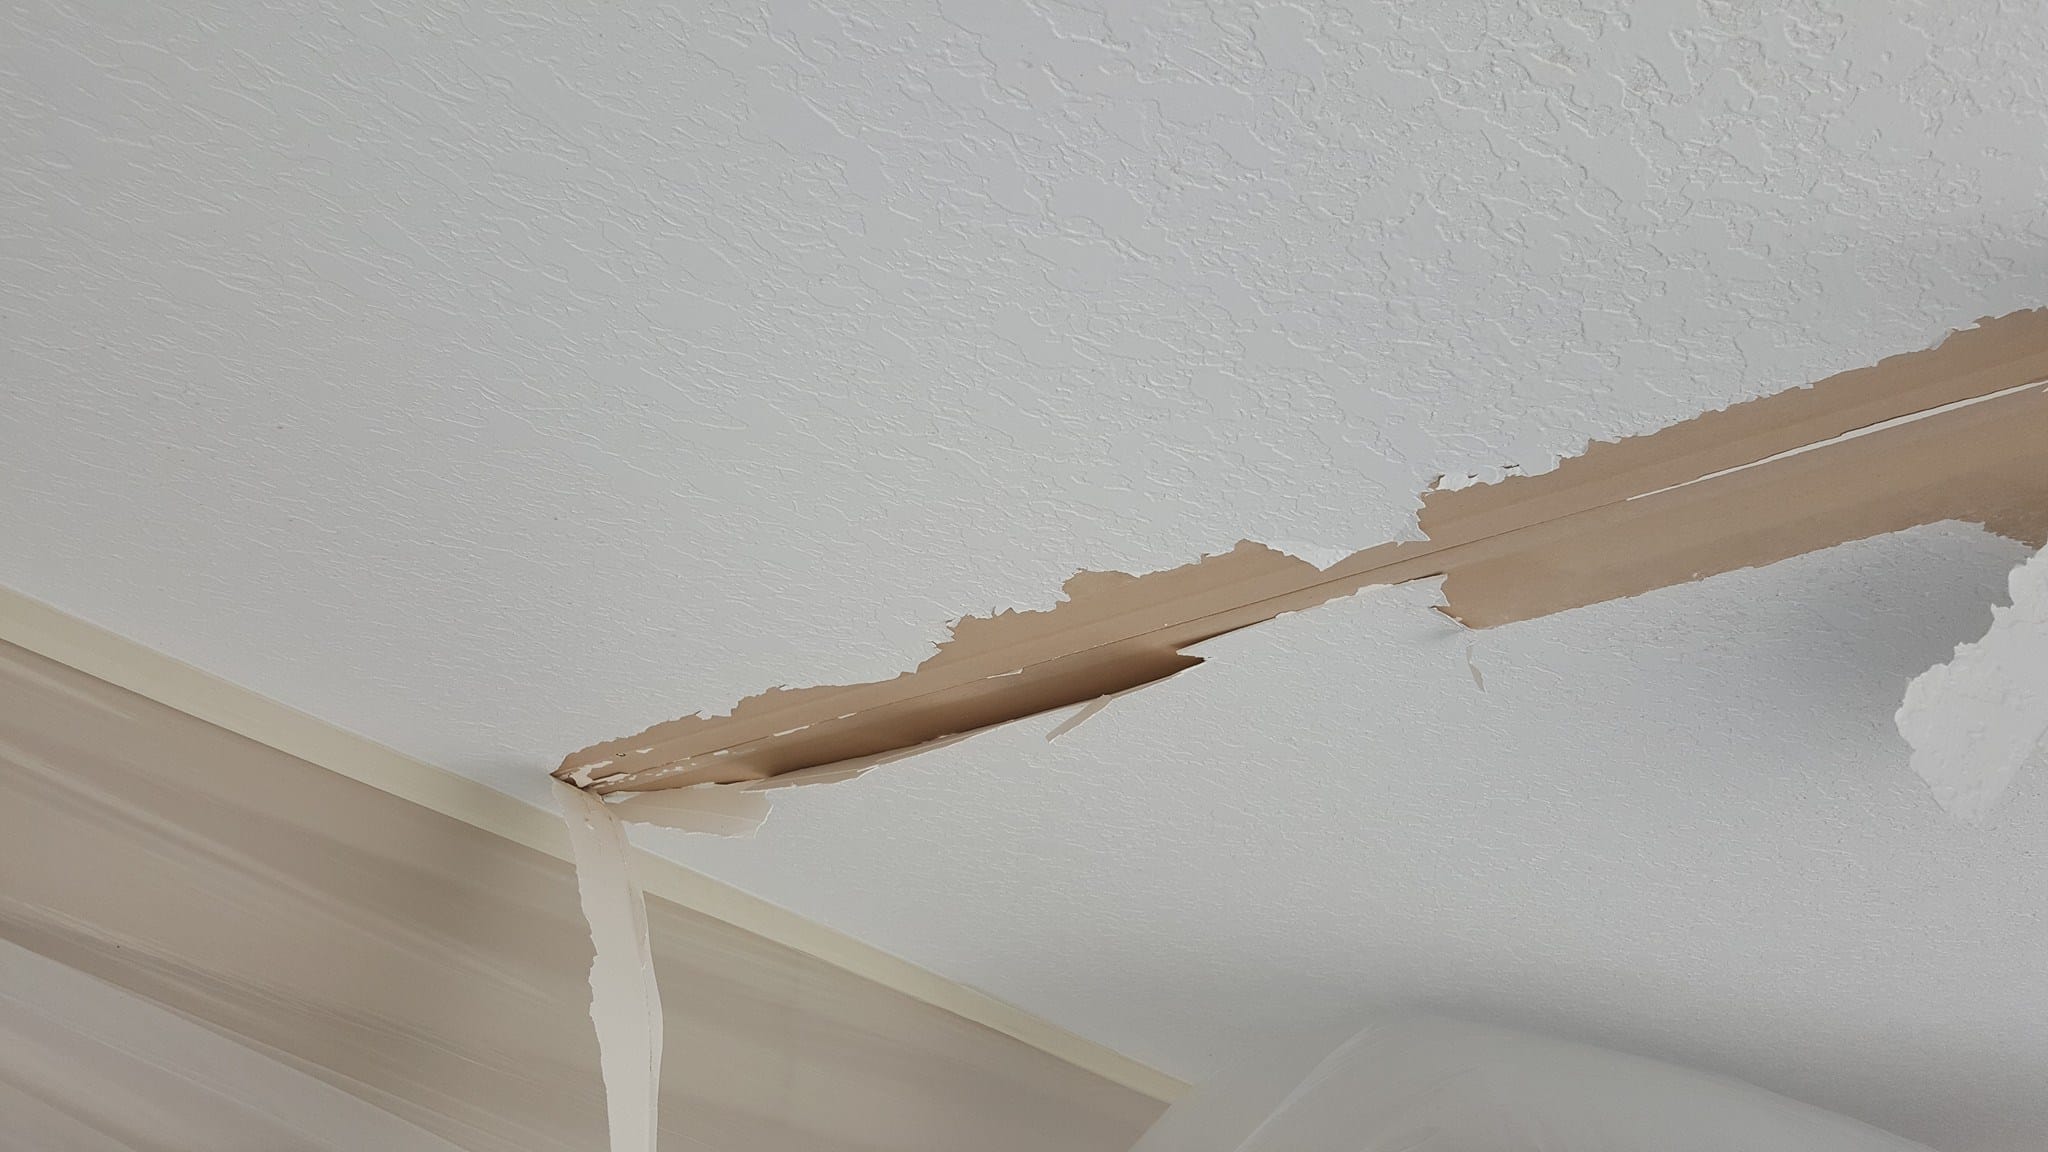 How to repair a crack in drywall